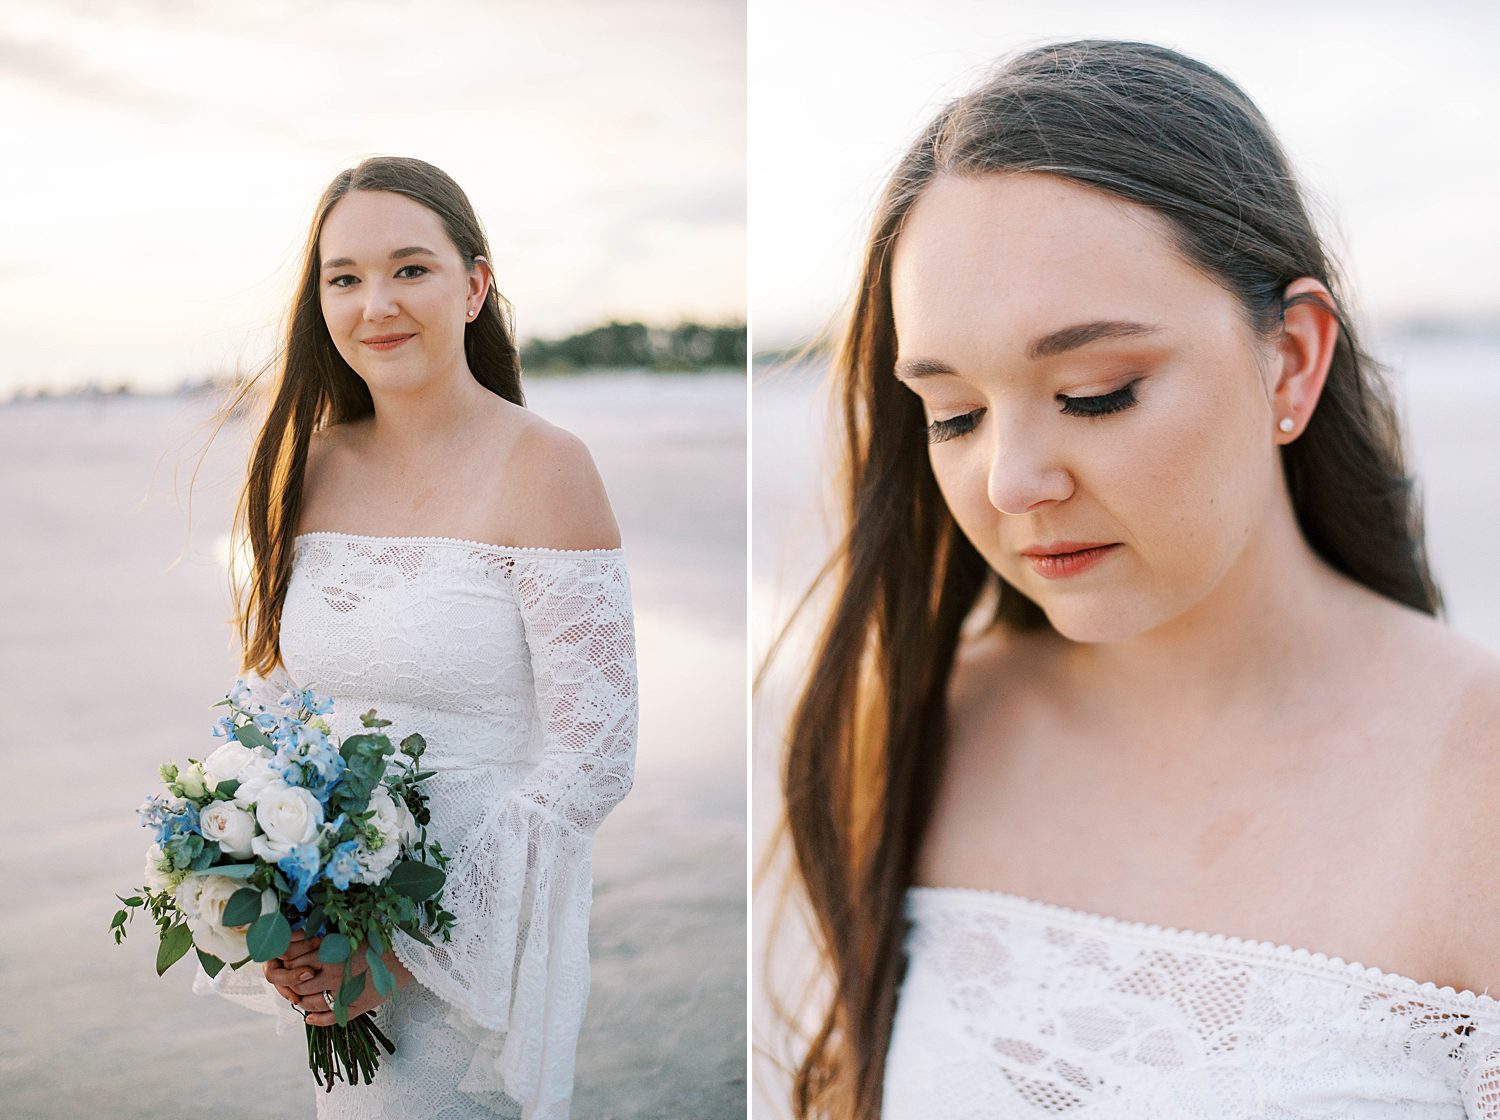 bride poses in off-the-shoulder gown with lace sleeves holding white and blue bouquet 